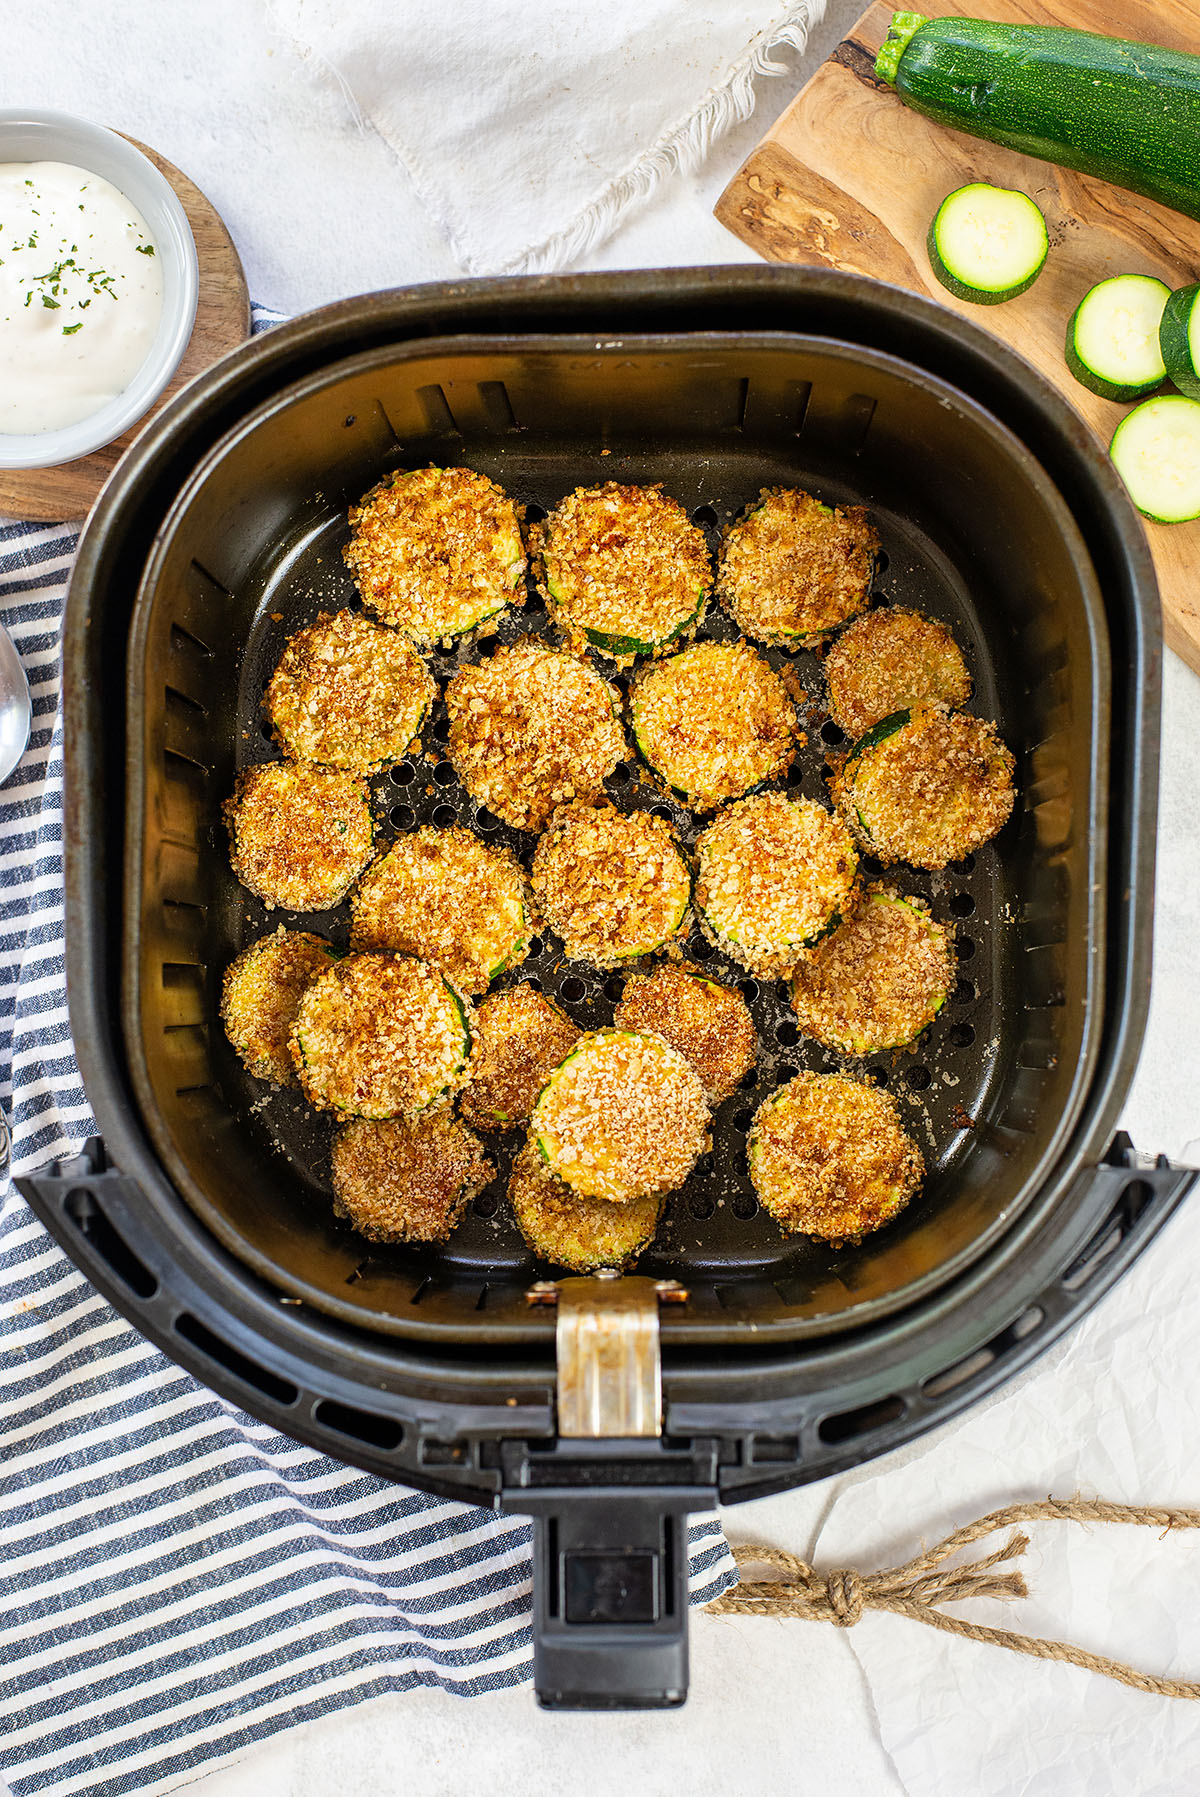 Overhead view of cooked air fried zucchini in an air fryer basket.